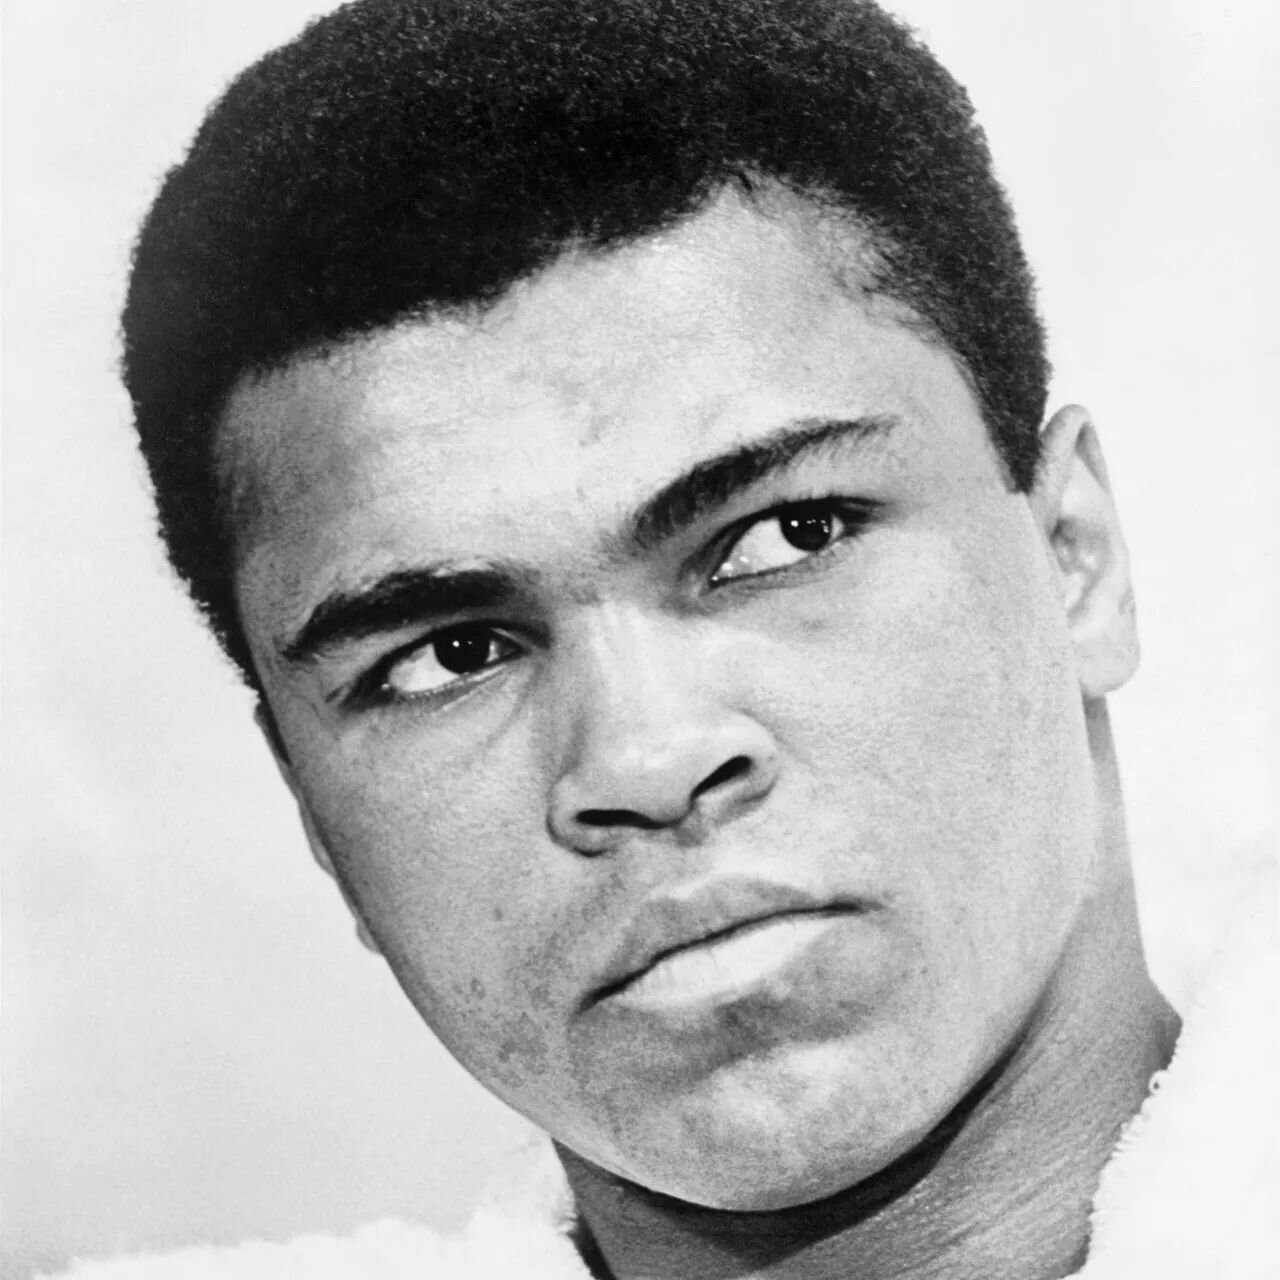 A Short History of Muhammad Ali is my third script for Noiser and easily the most absorbing subject to research. What a man! I had zero interest in boxing before this, and it&rsquo;s still not my favourite sport, but Ali is utterly fascinating and in